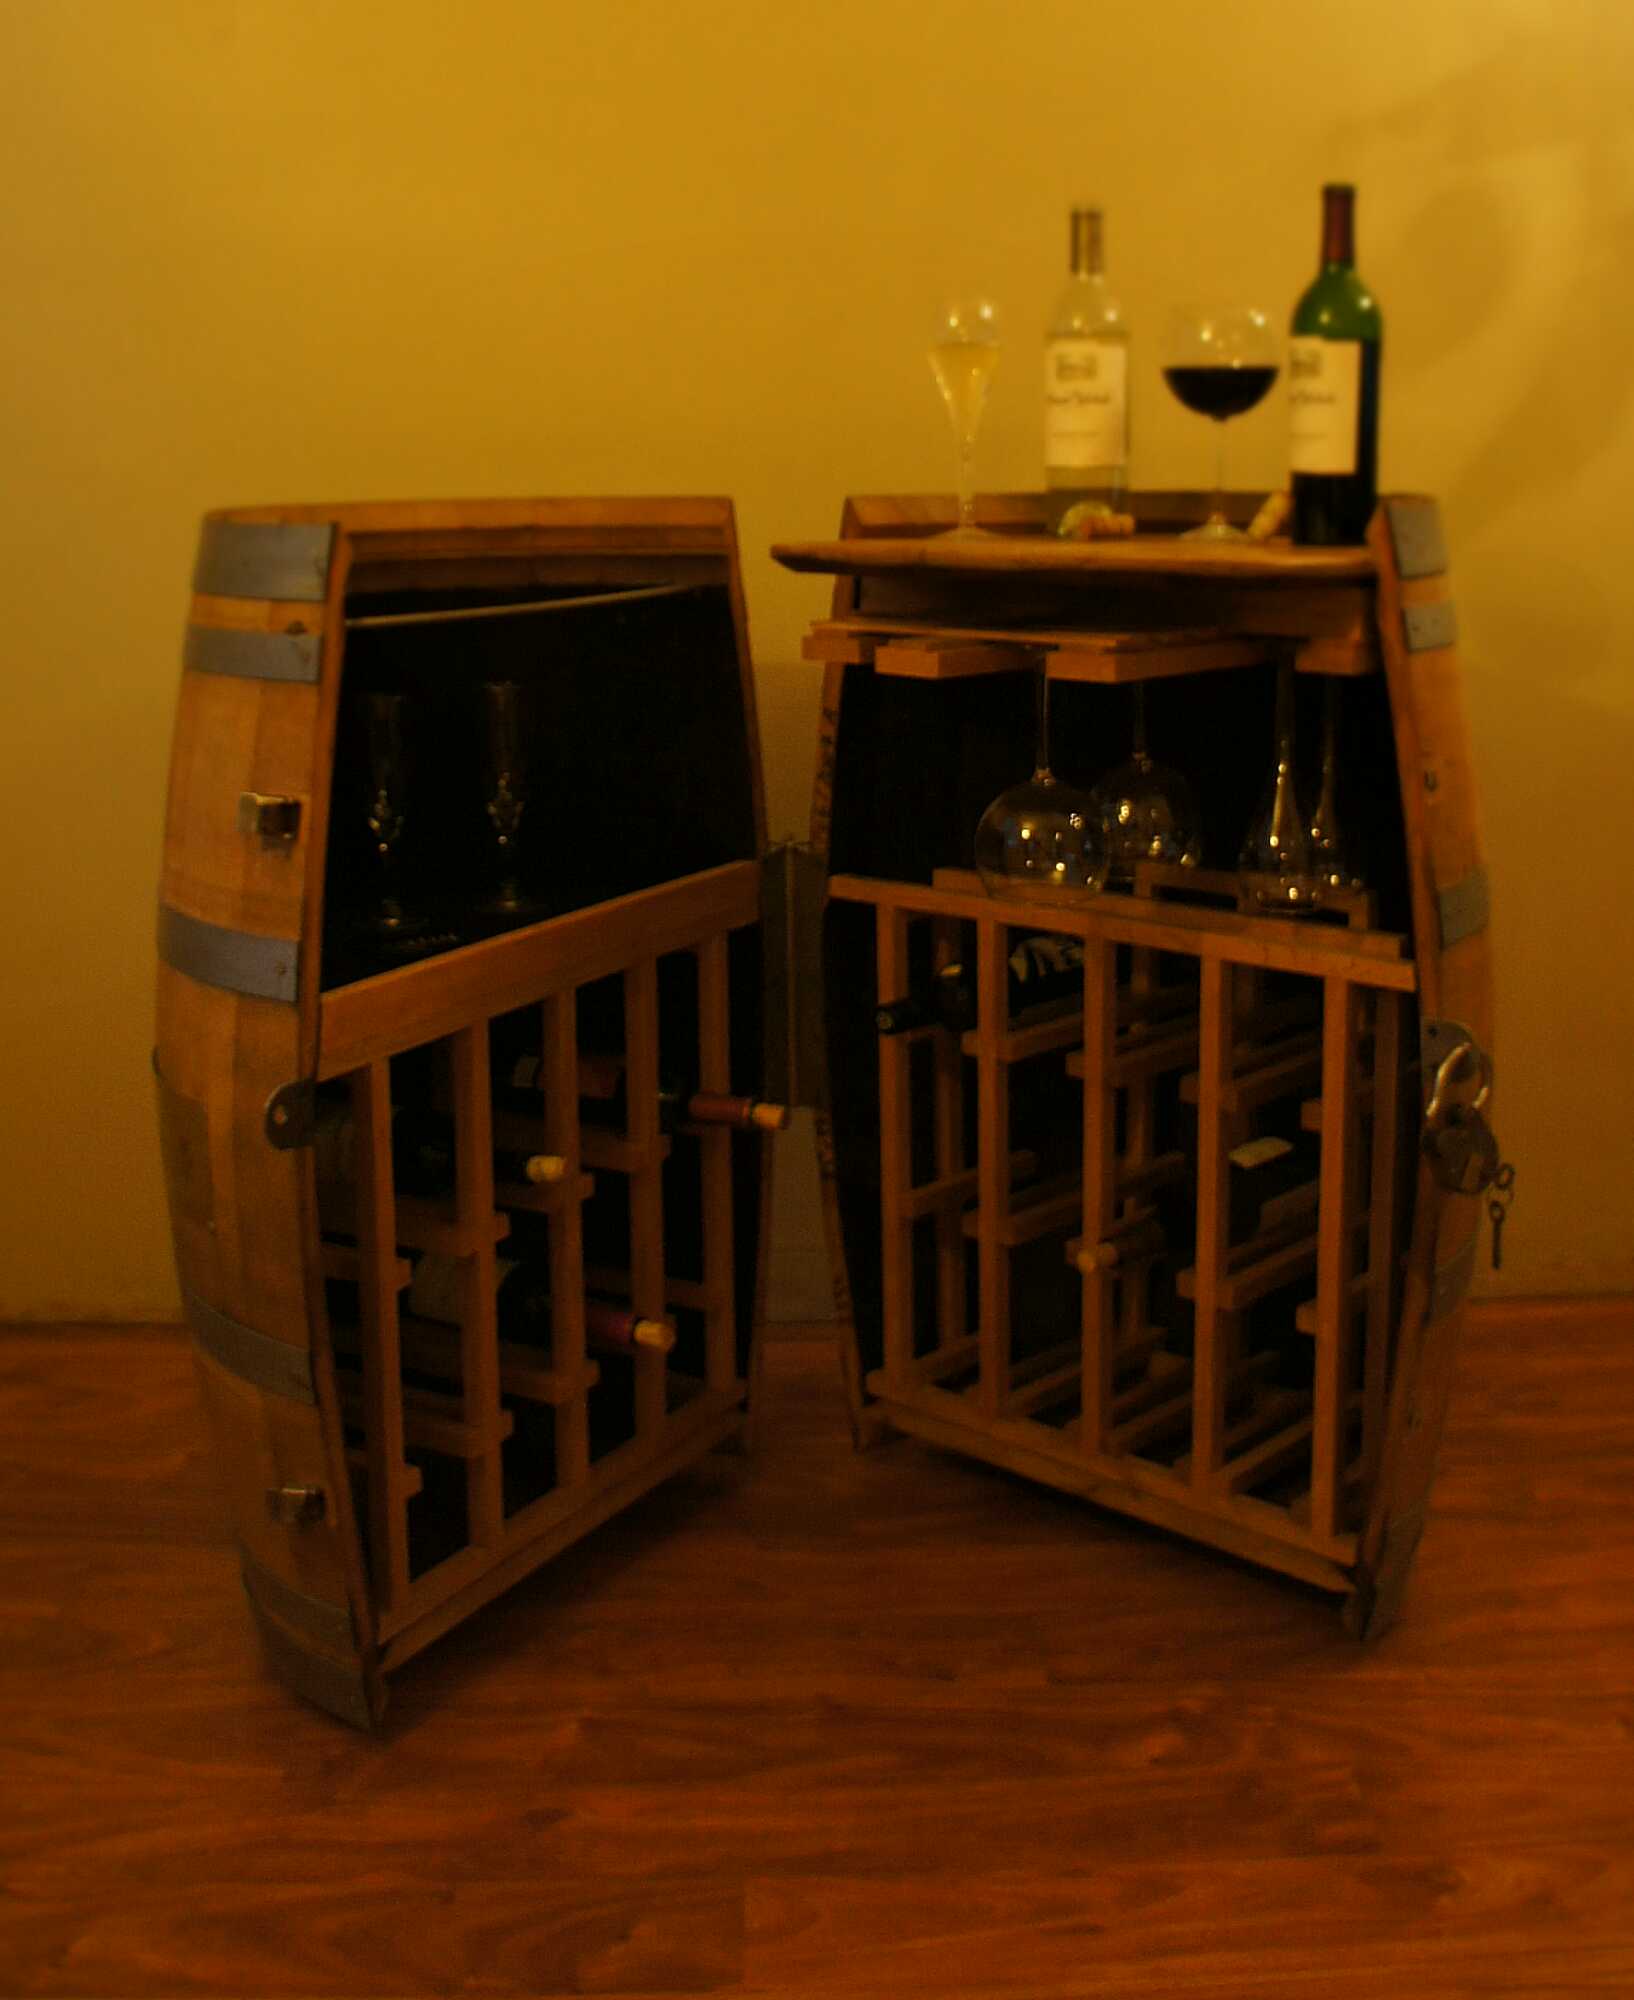 How To Make A Wine Barrel Cabinet Easy Craft Ideas